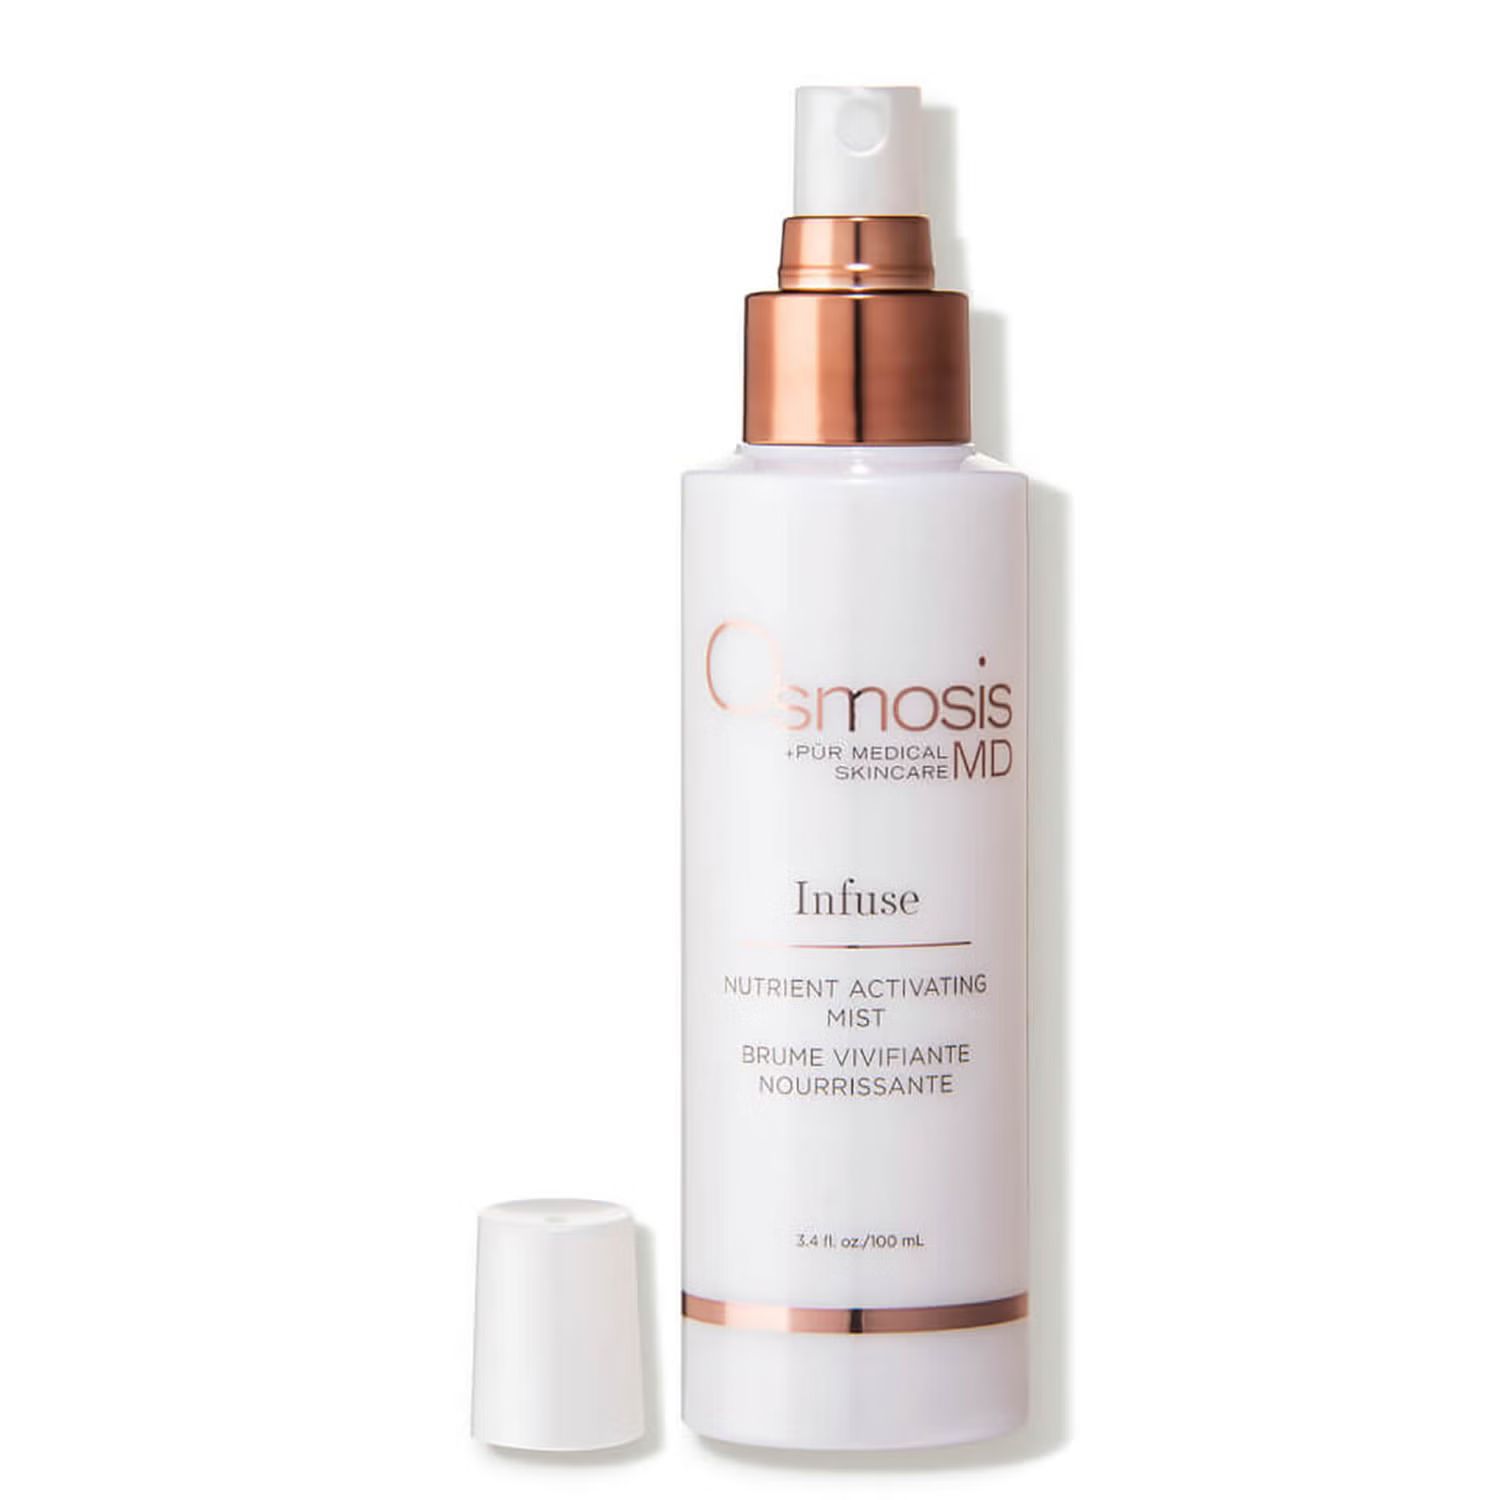 Osmosis +Beauty Infuse - Nutrient Activating Mist (3.4 fl. oz.) | Dermstore